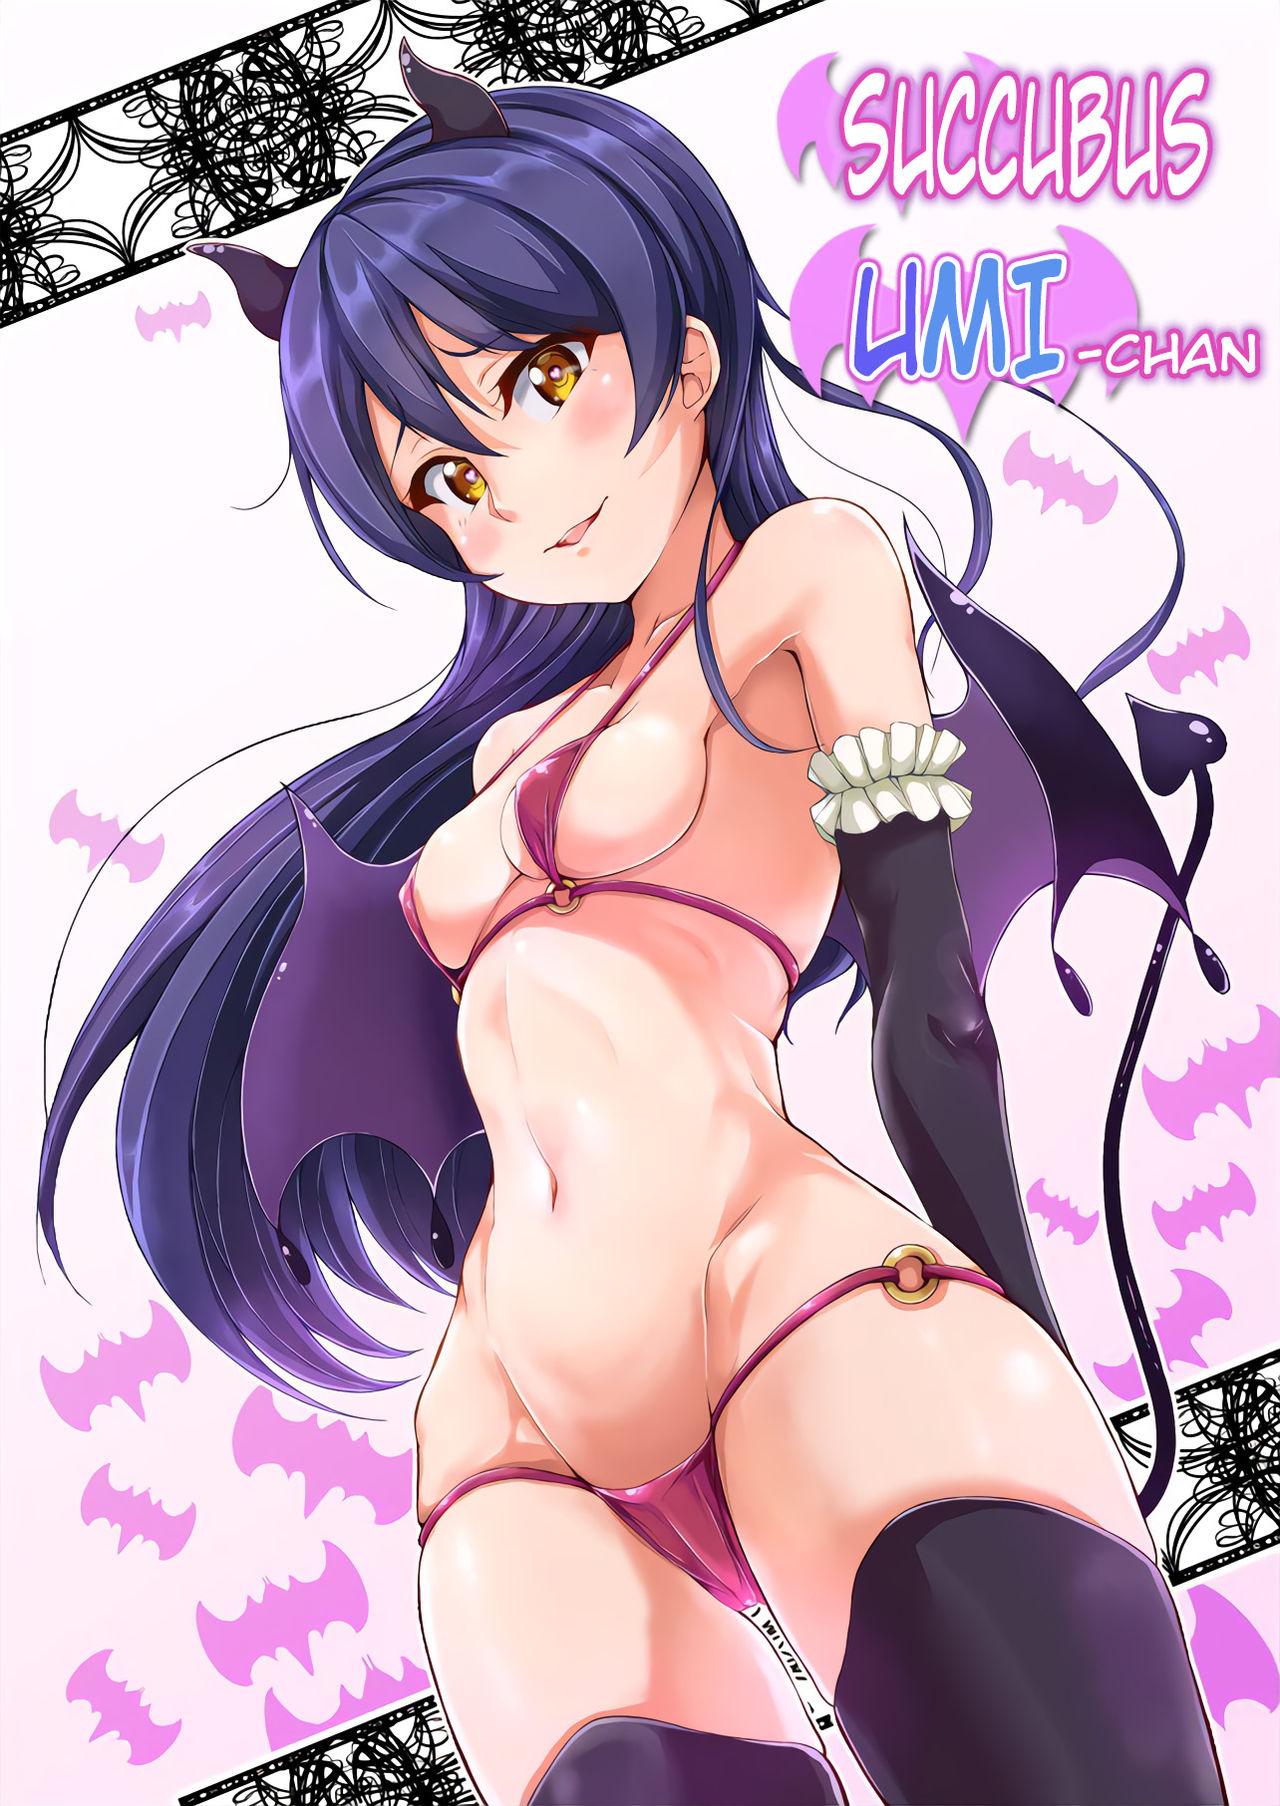 Star Succubus Umi-chan - Love live Fingers - Picture 1